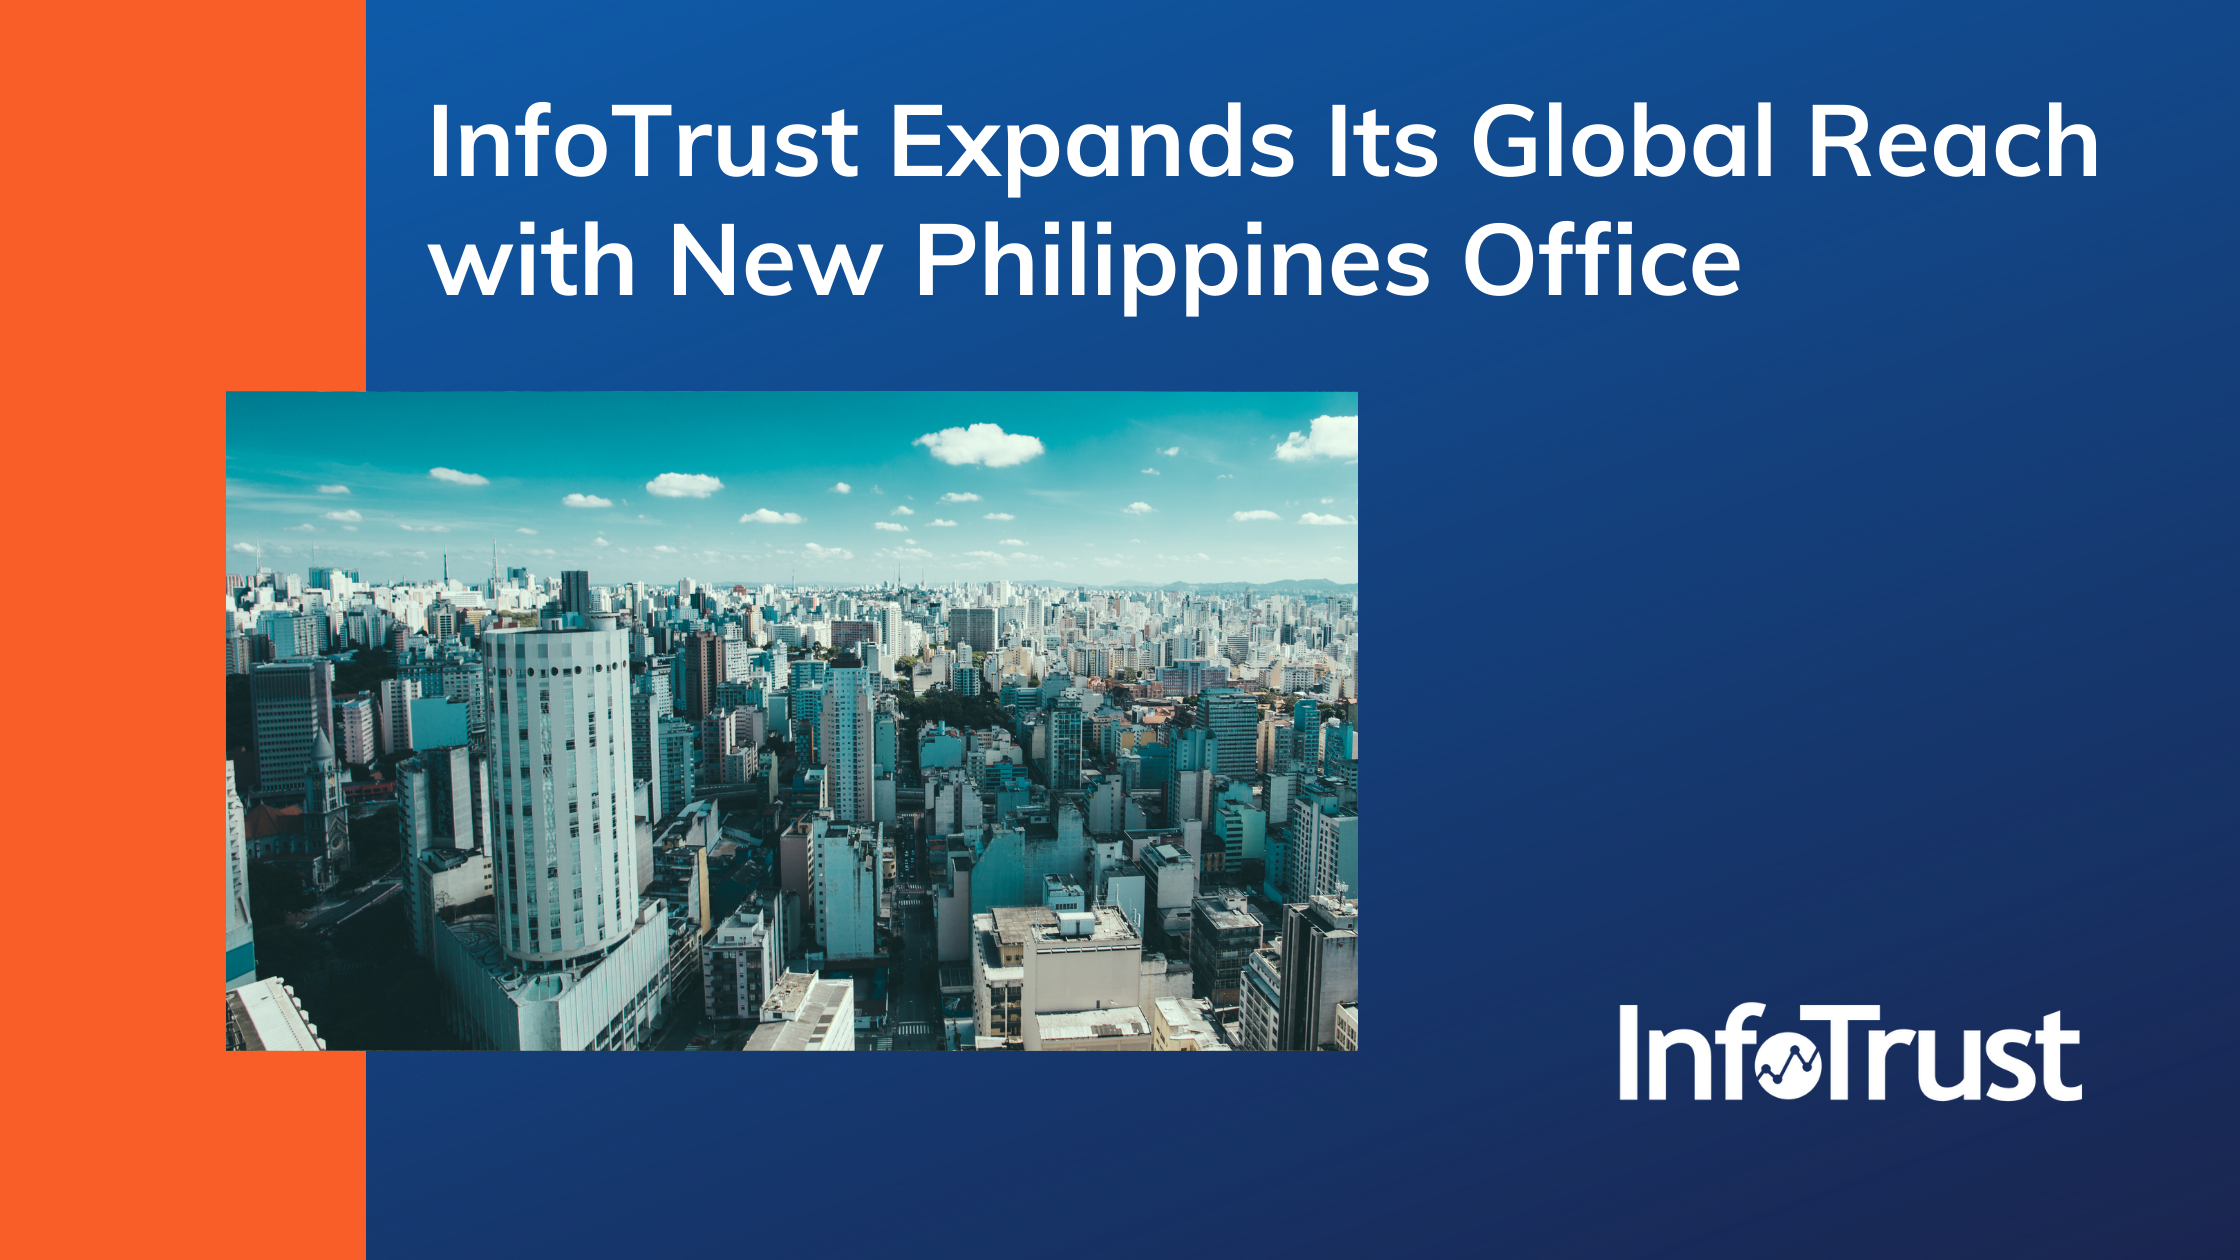 InfoTrust Expands Its Global Reach with New Philippines Office